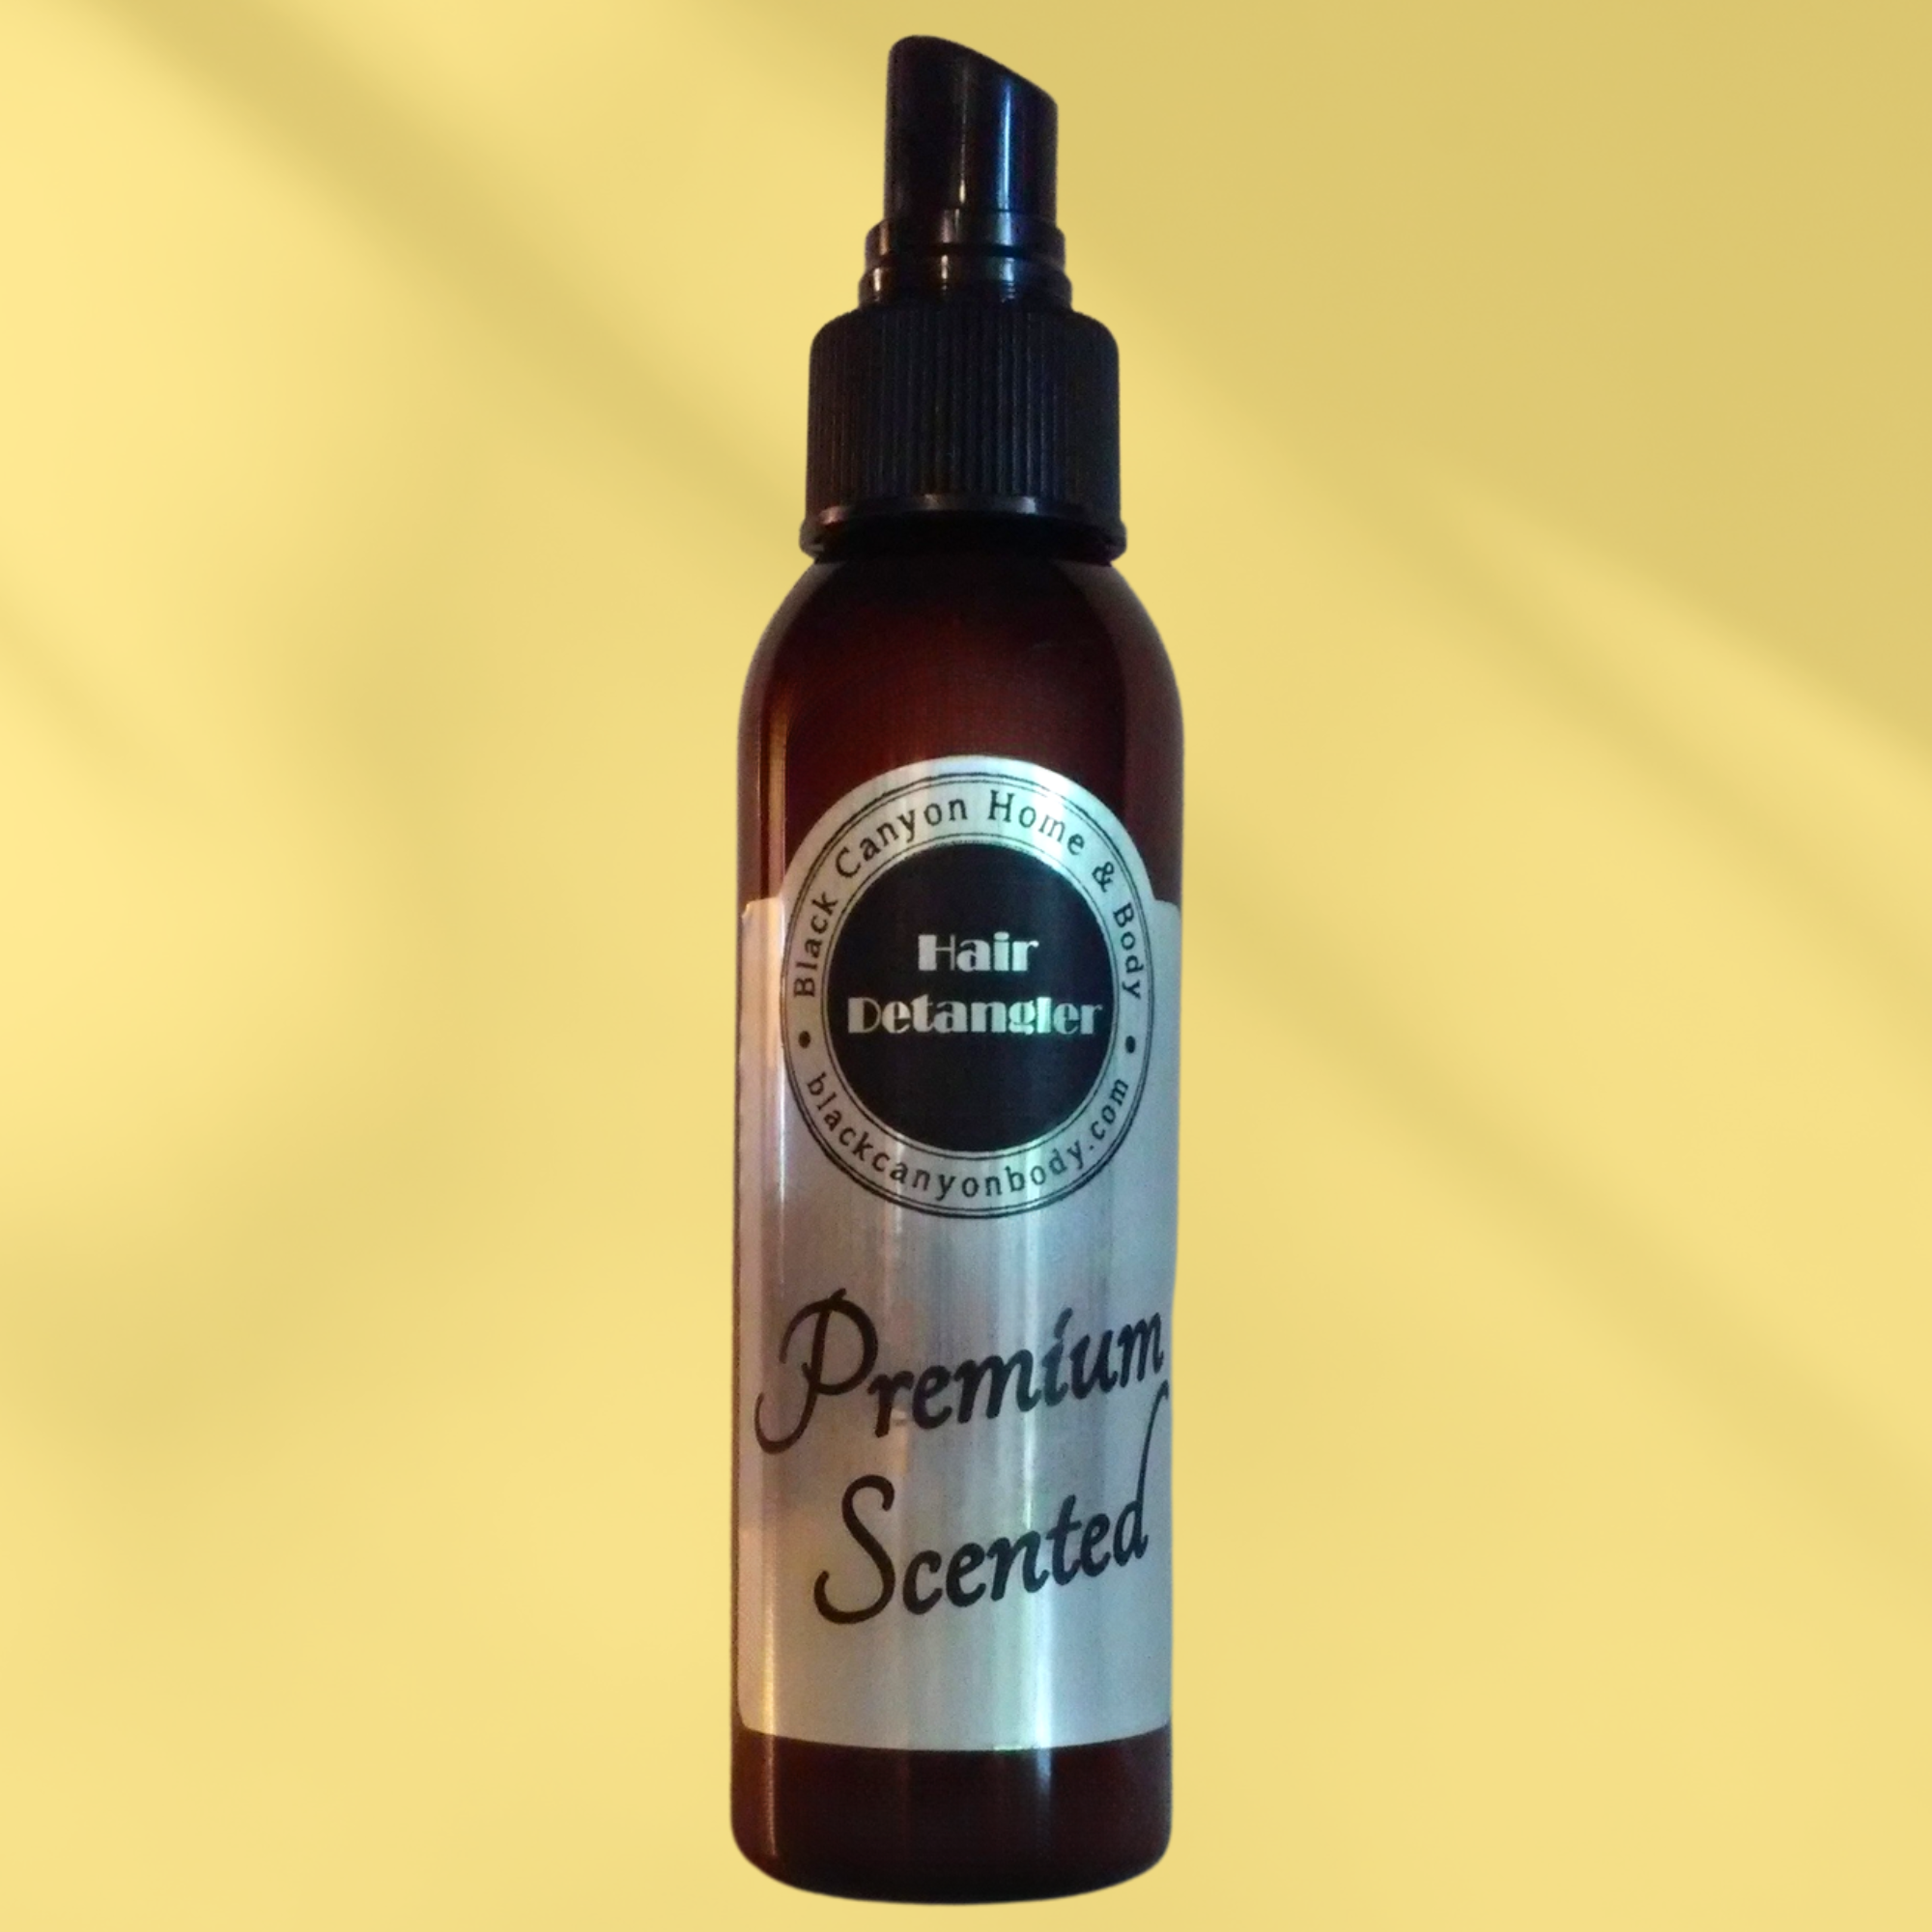 Black Canyon Black Coconut Scented Hair Detangler Spray with Olive Oil